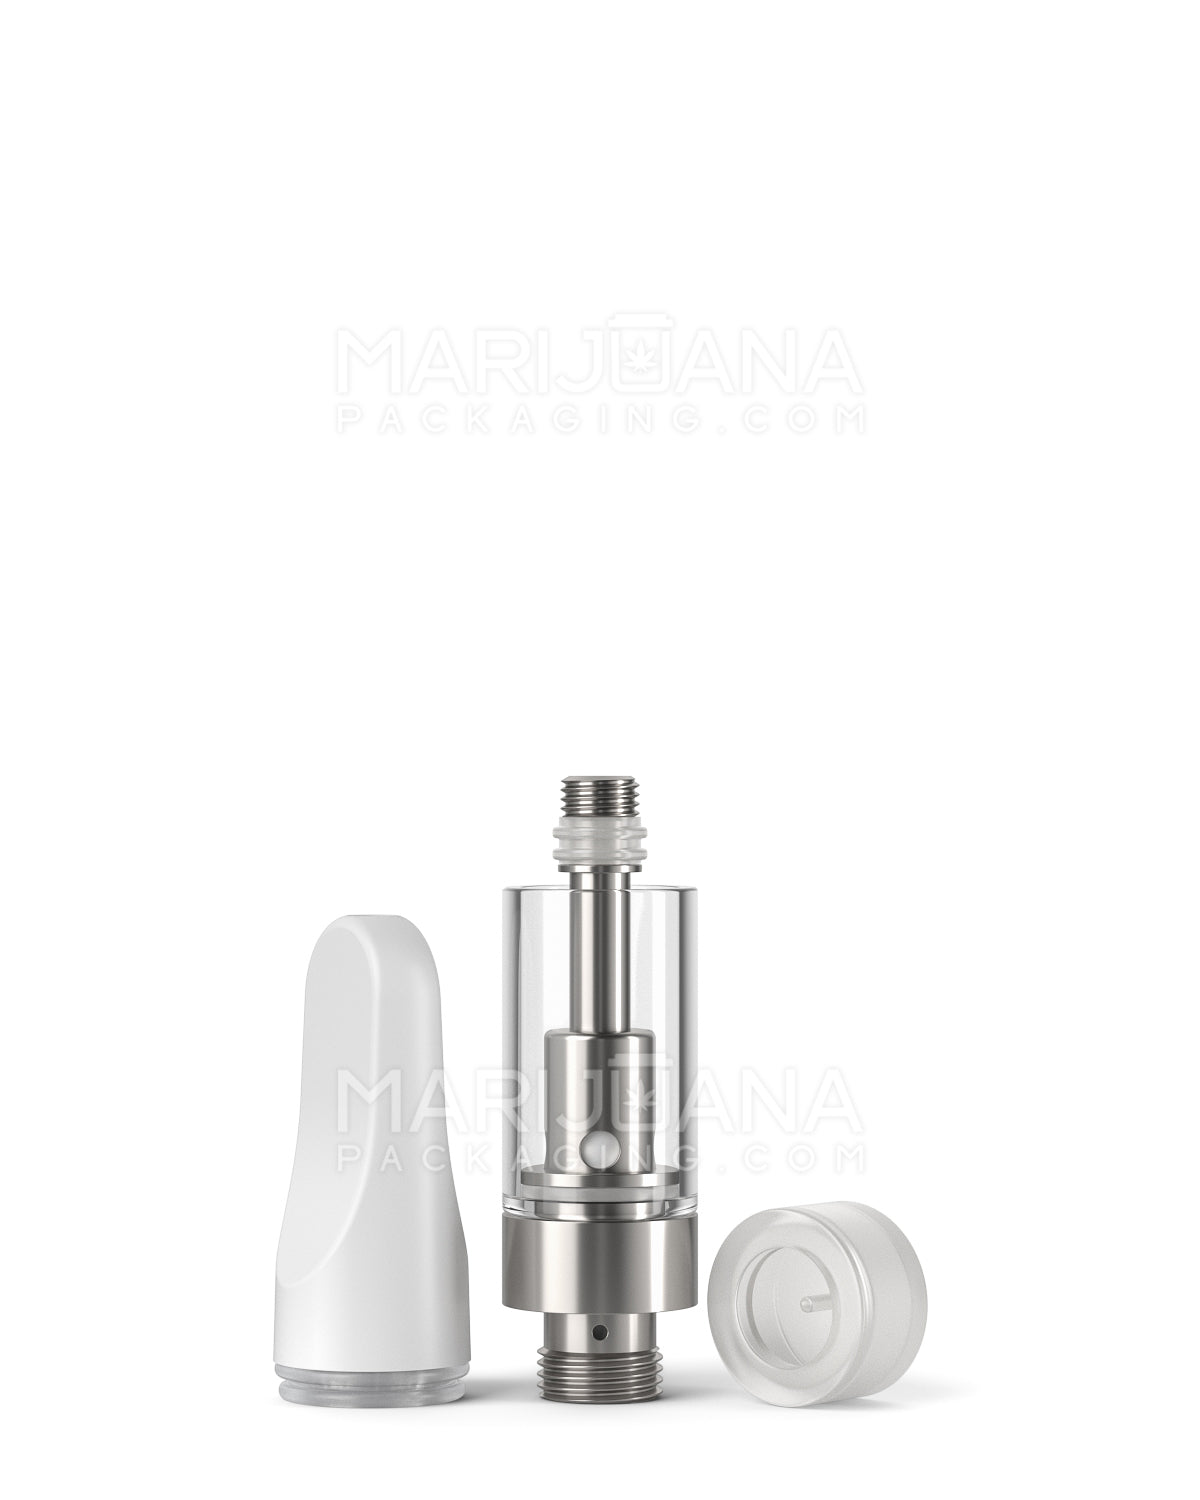 CCELL | Liquid6 Reactor Glass Vape Cartridge with White Plastic Mouthpiece | 0.5mL - Screw On - 100 Count - 5